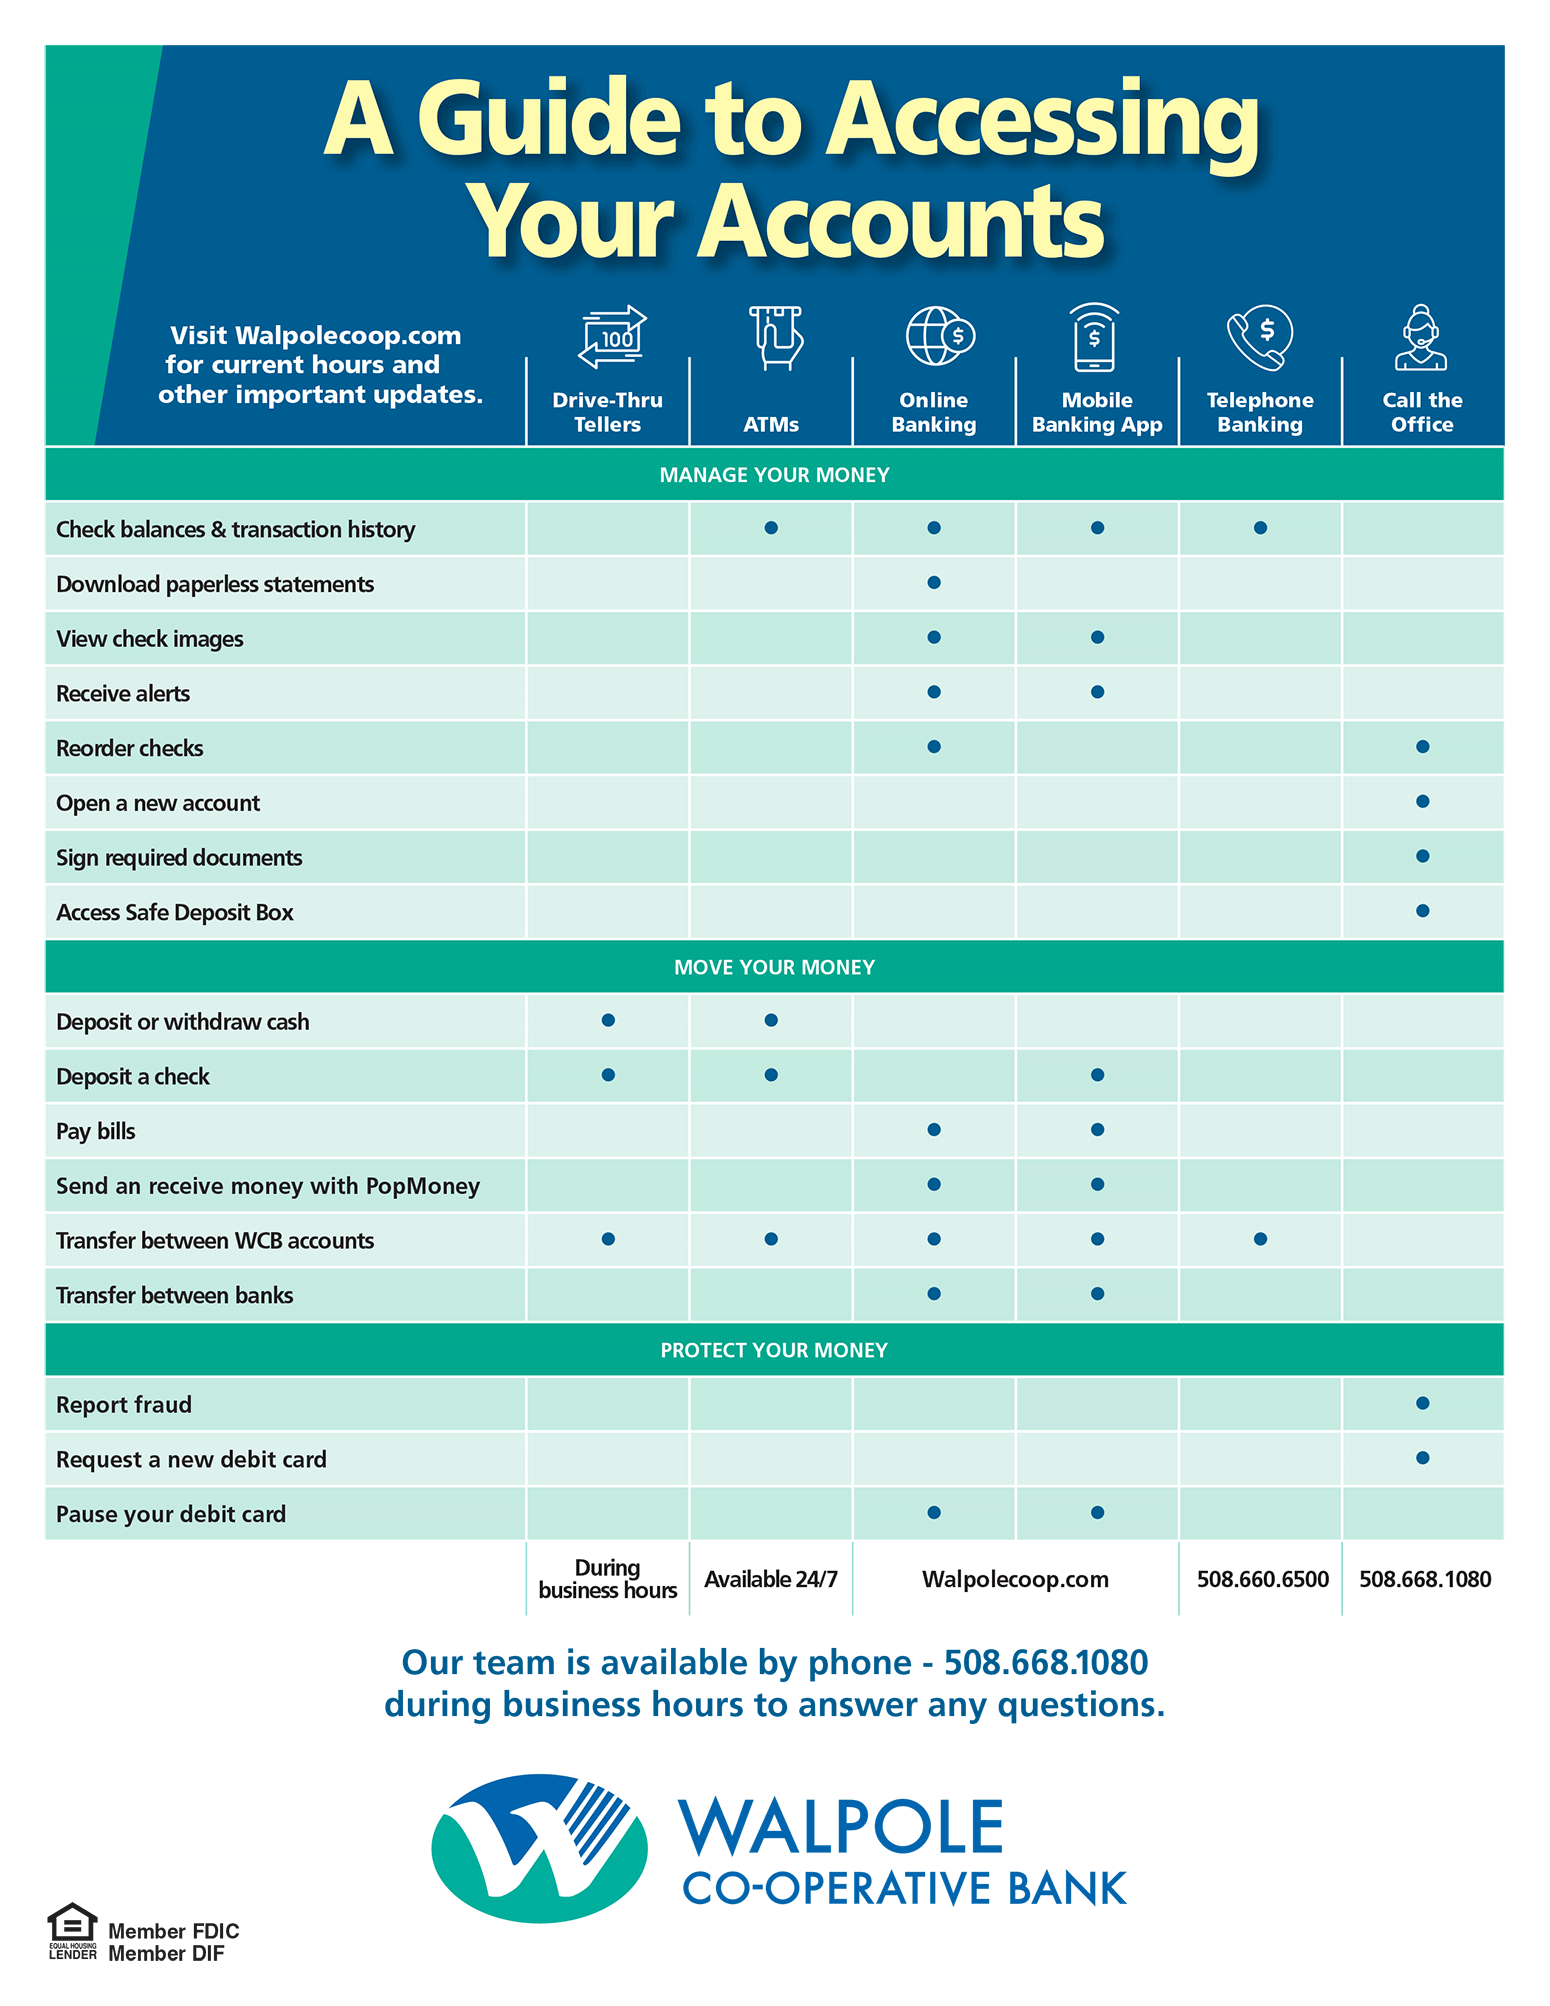 Account Access Guide PNG